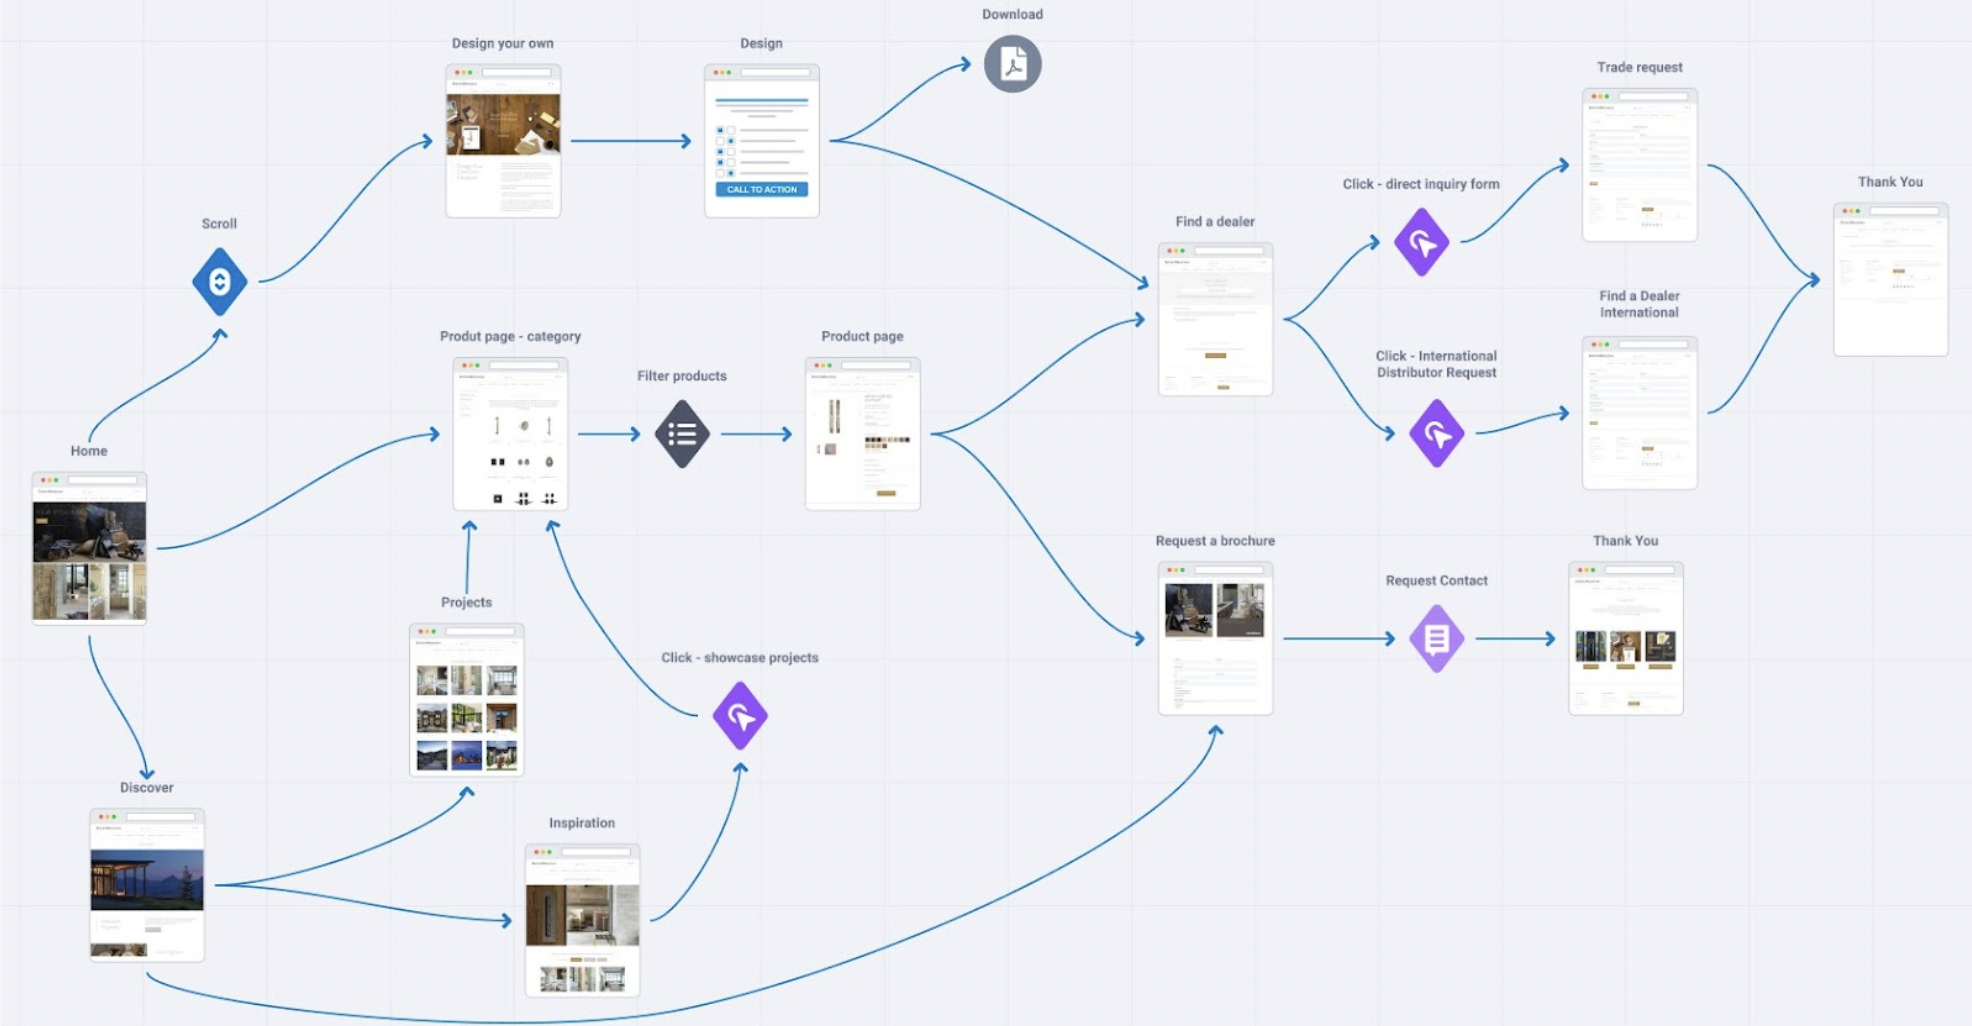 Customer journey map showing different pathways a user takes to get to a conversion point